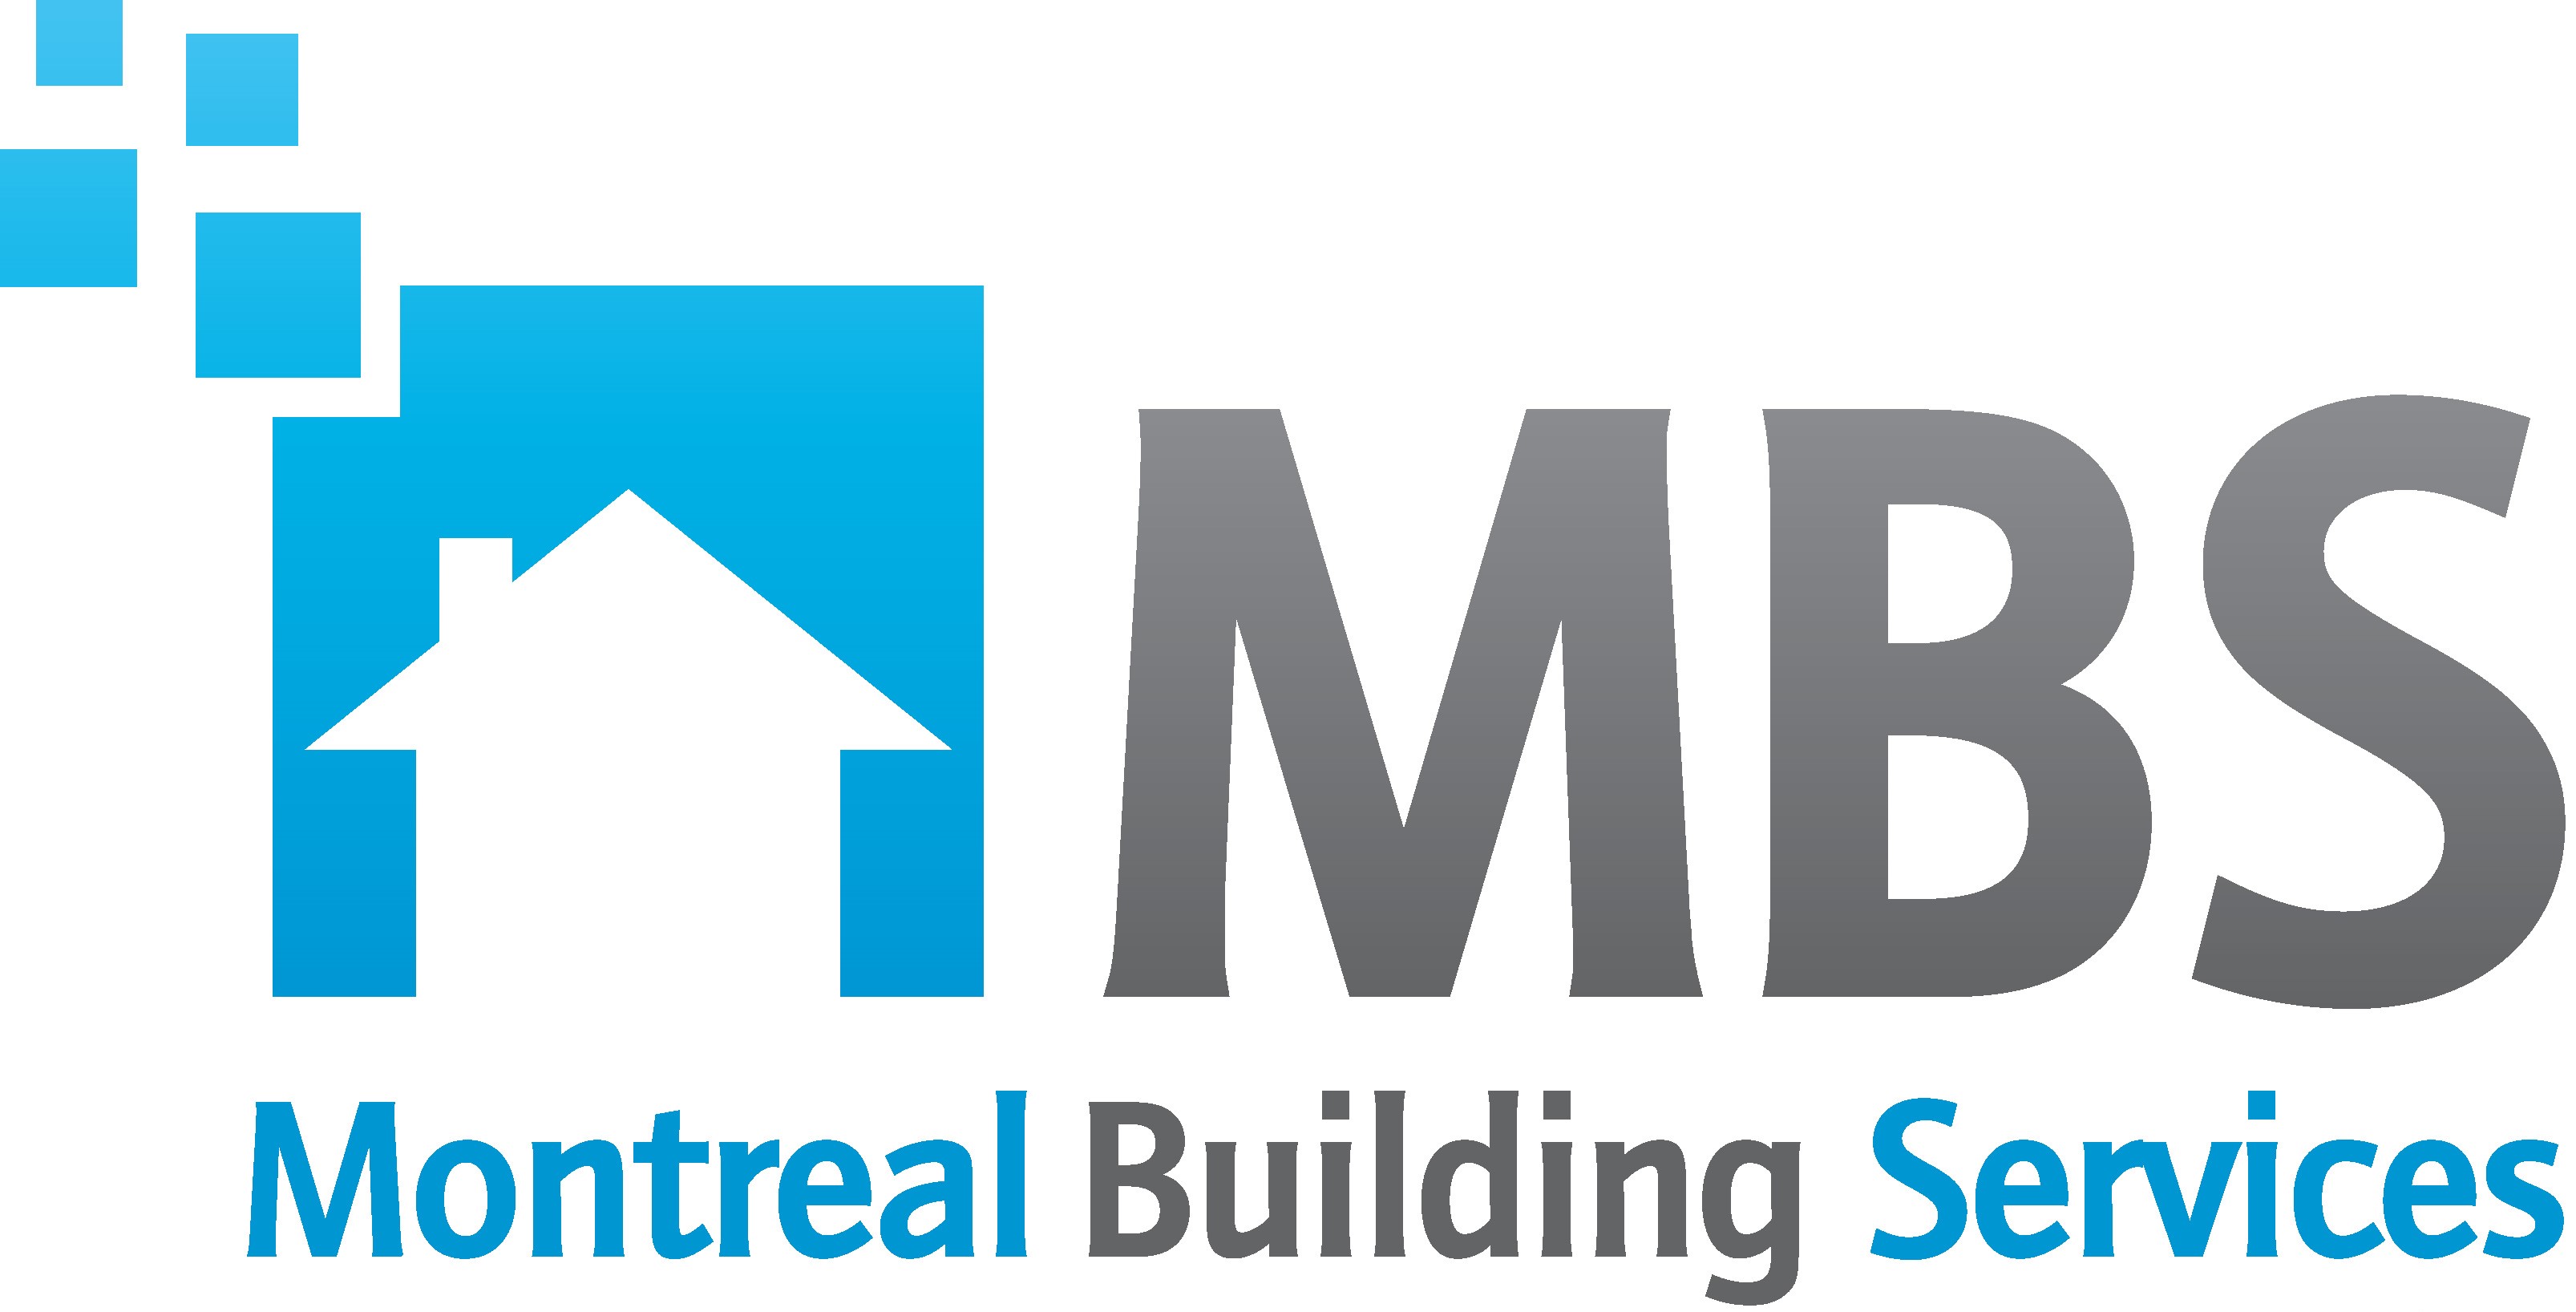 Montreal Building Services logo